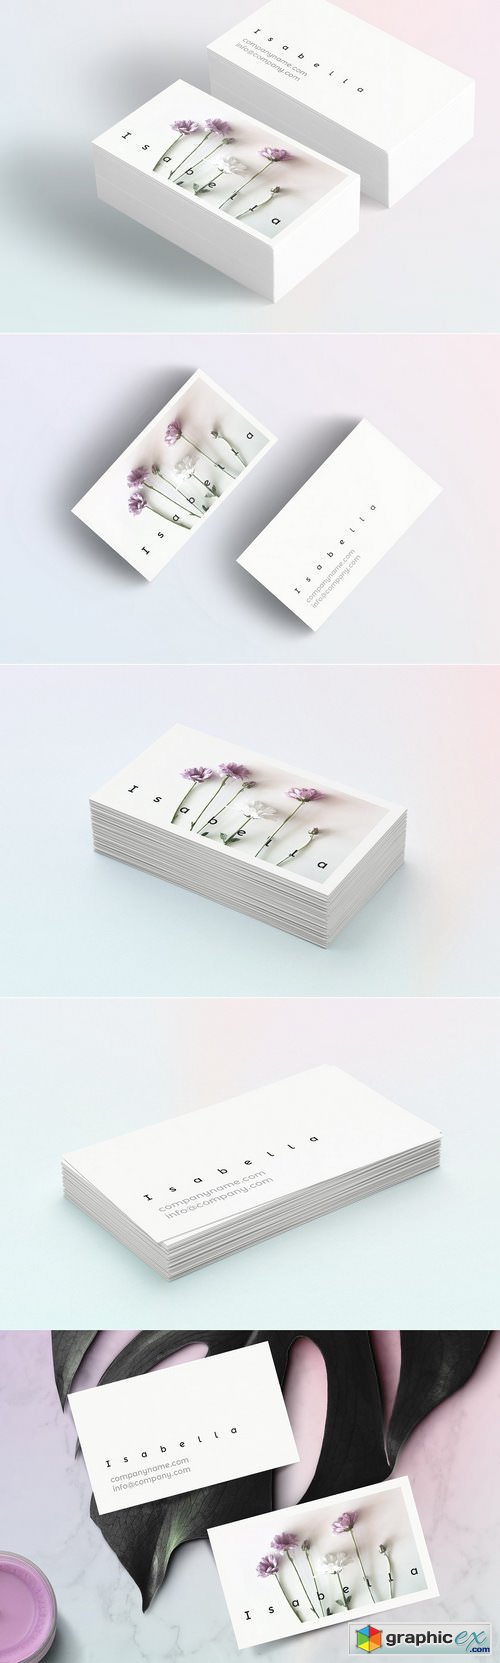 Isabella-floral business card